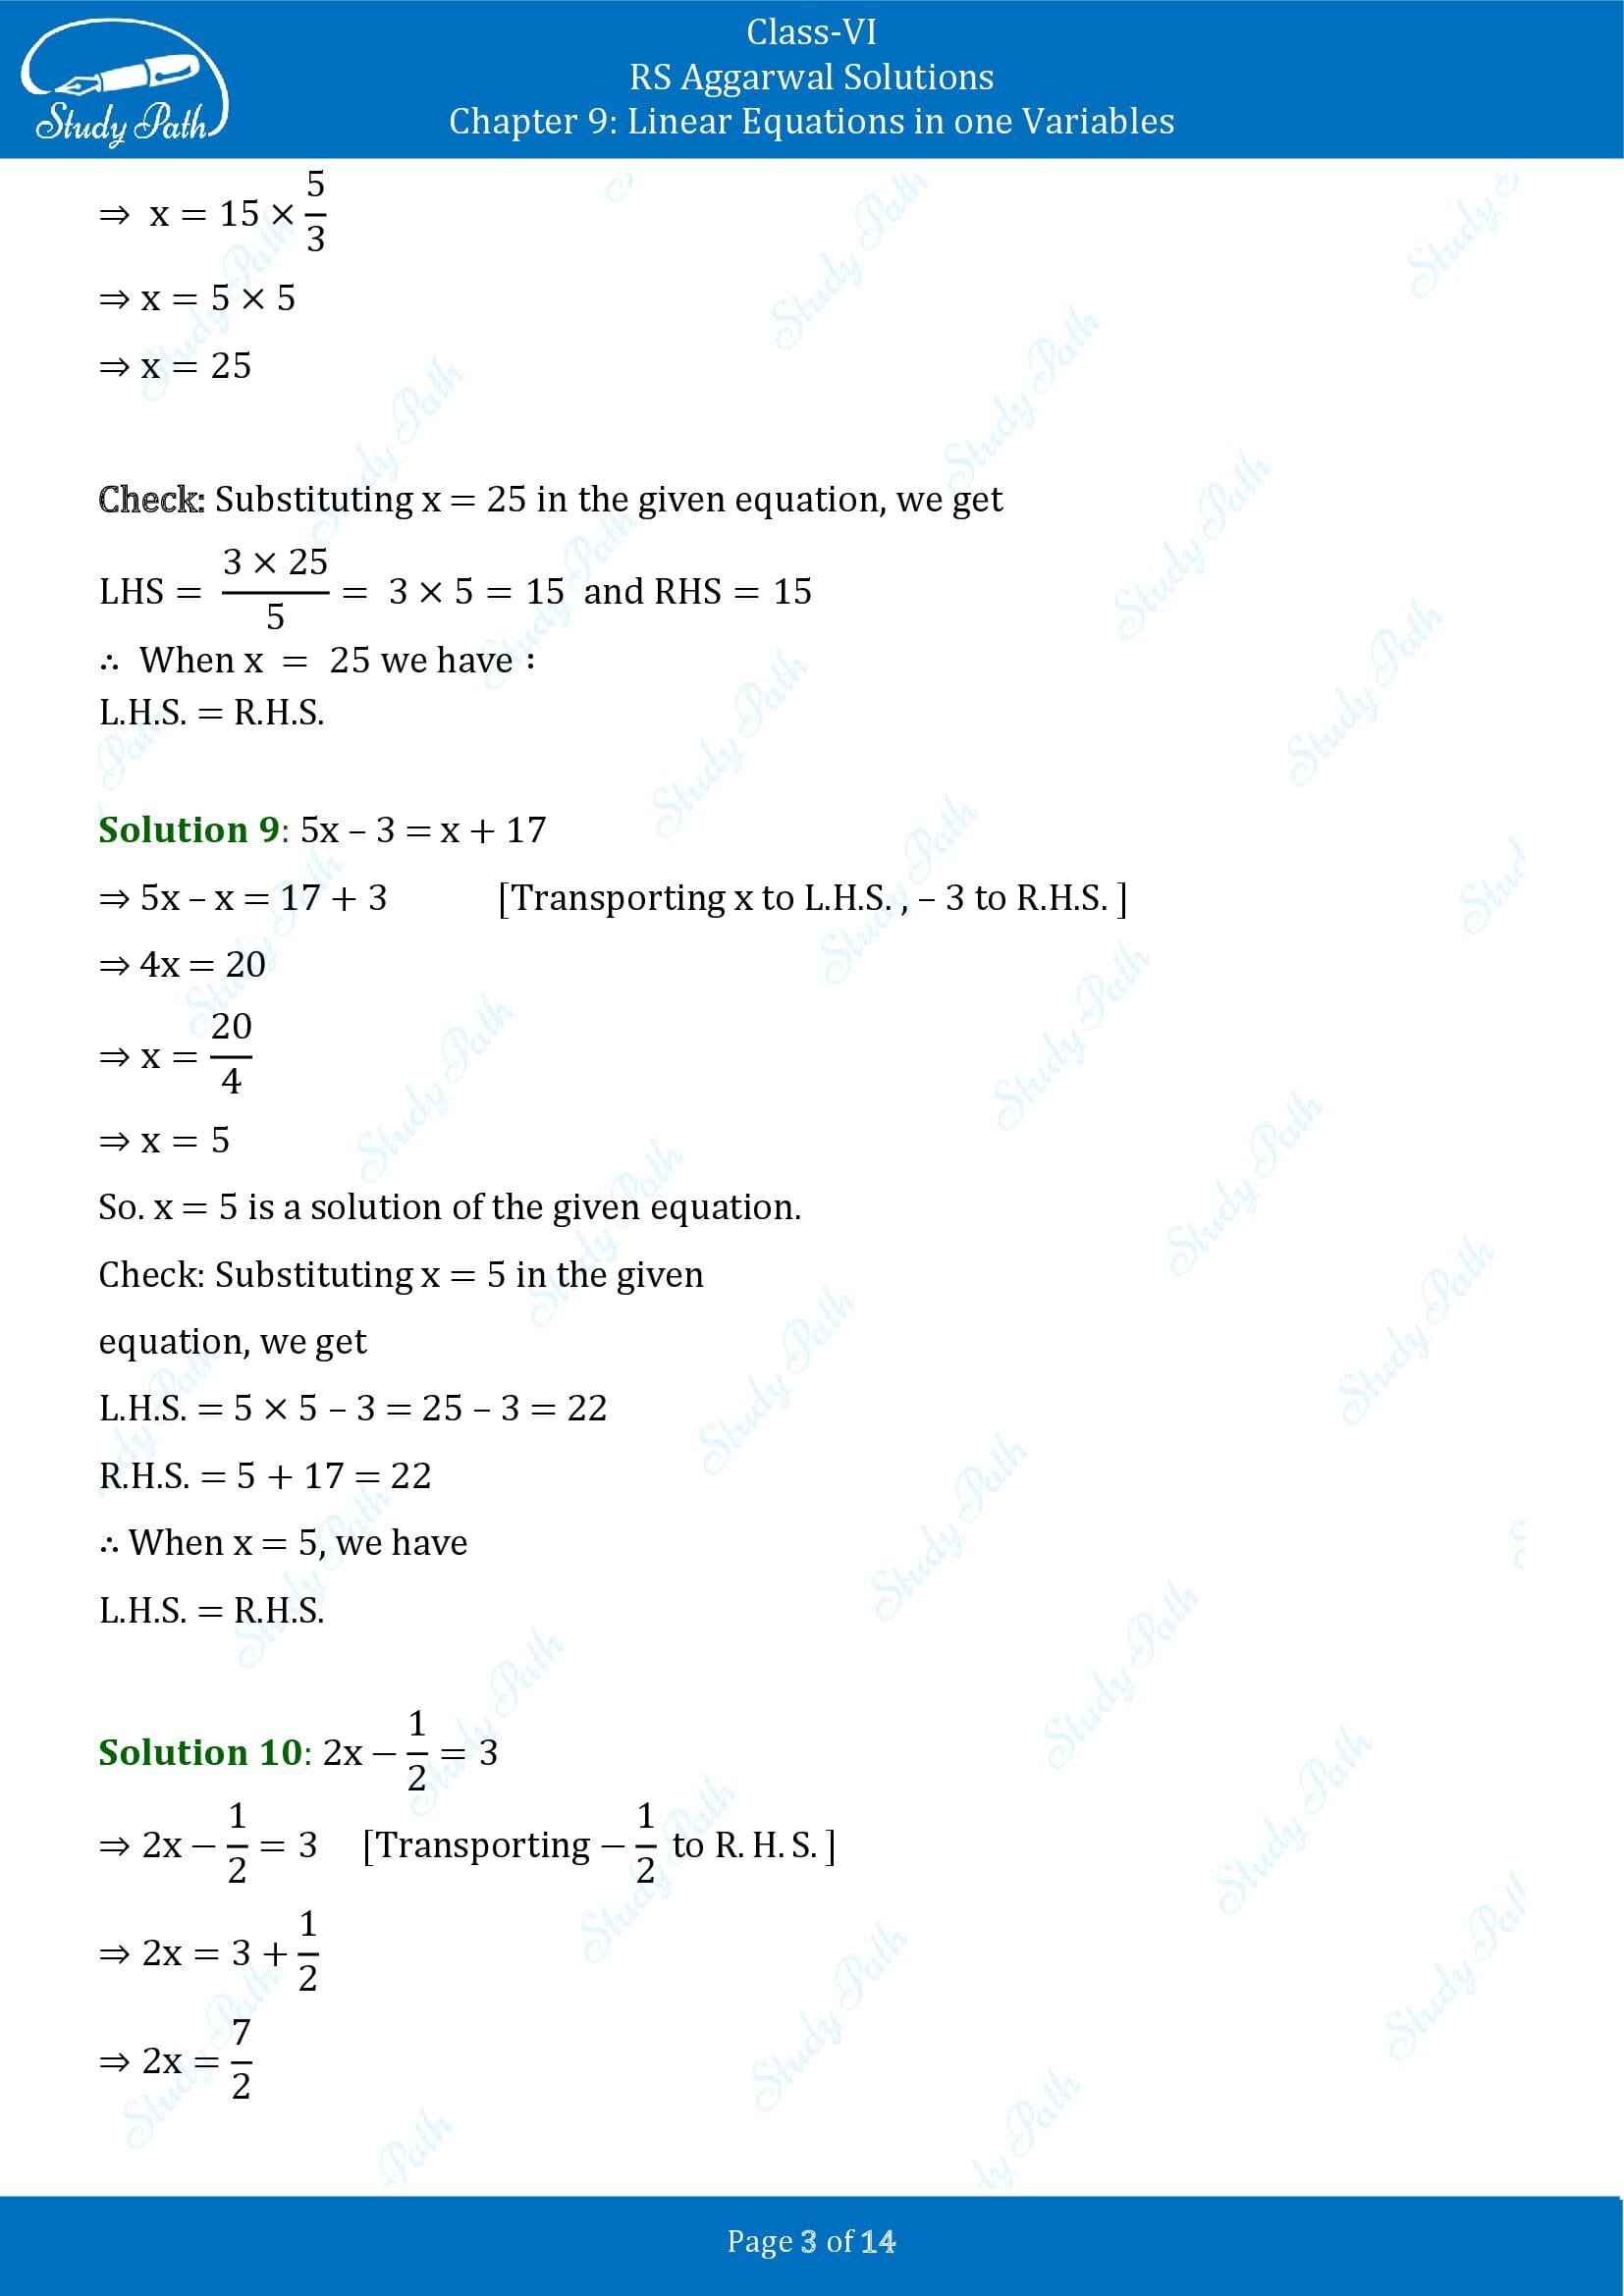 RS Aggarwal Solutions Class 6 Chapter 9 Linear Equations in One Variable Exercise 9B 00003